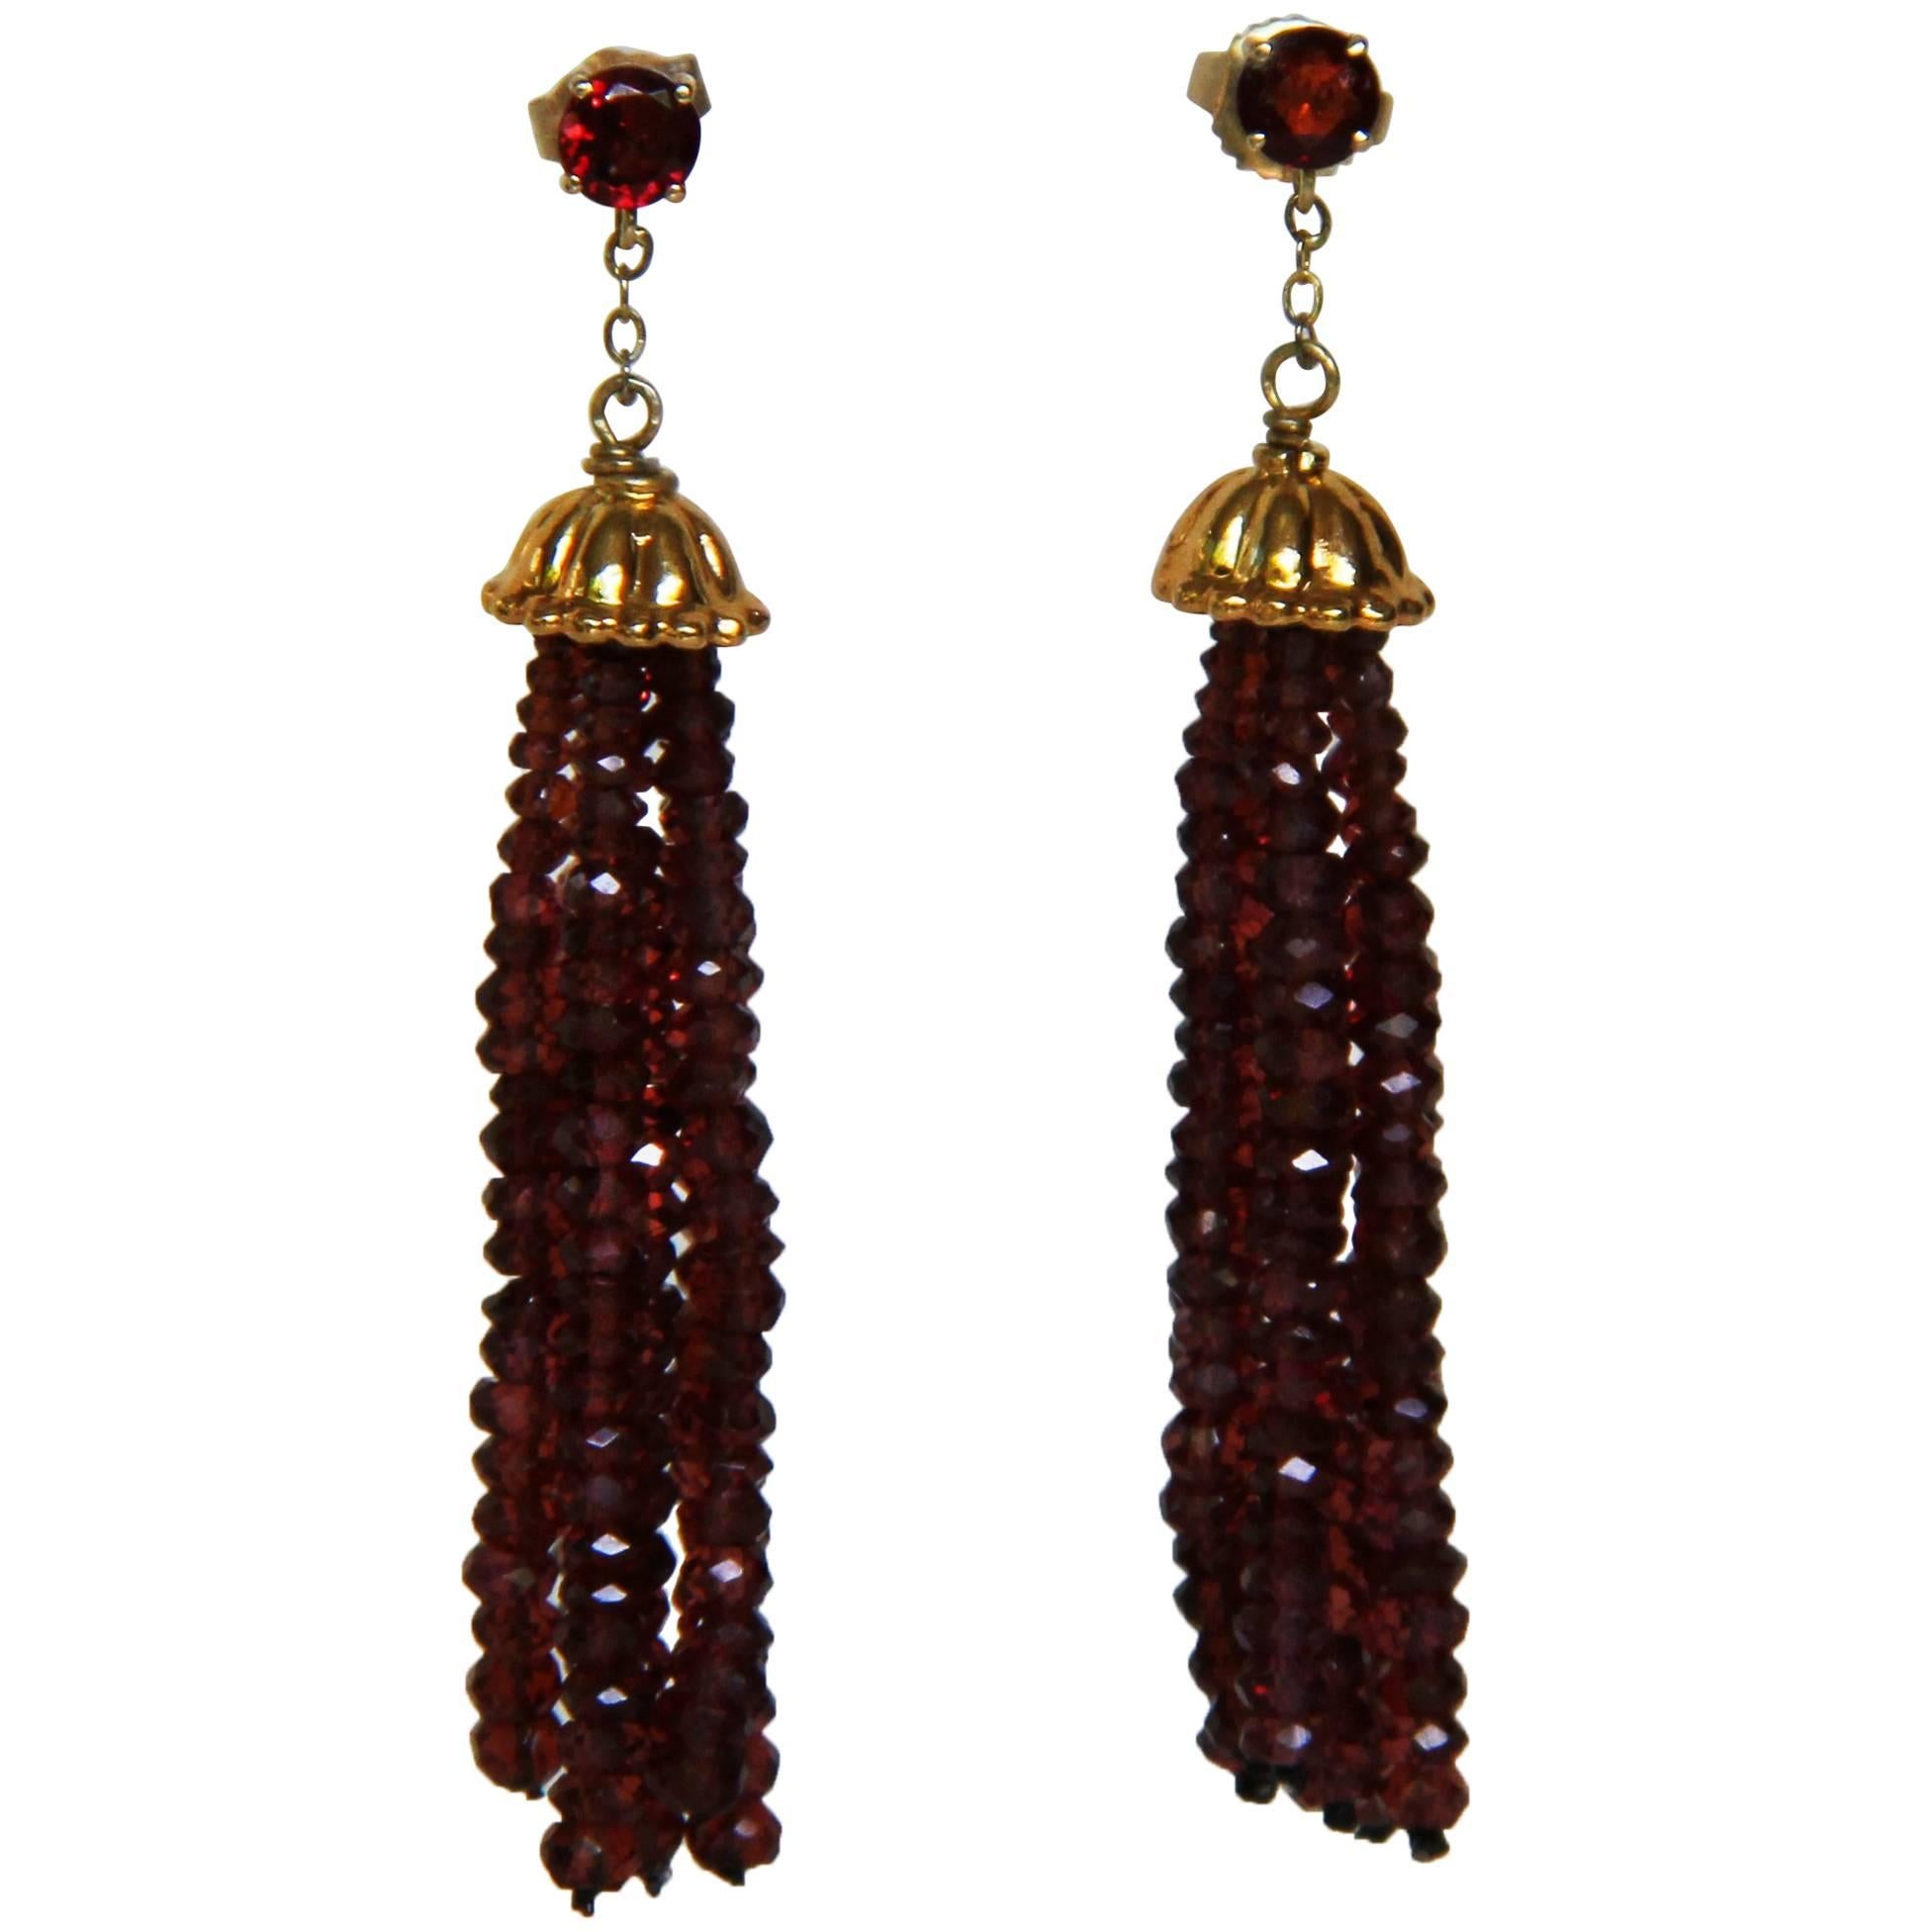 Garnet Tassel Earrings with Gold-Plated Silver Cup and Gold Stud by Marina J